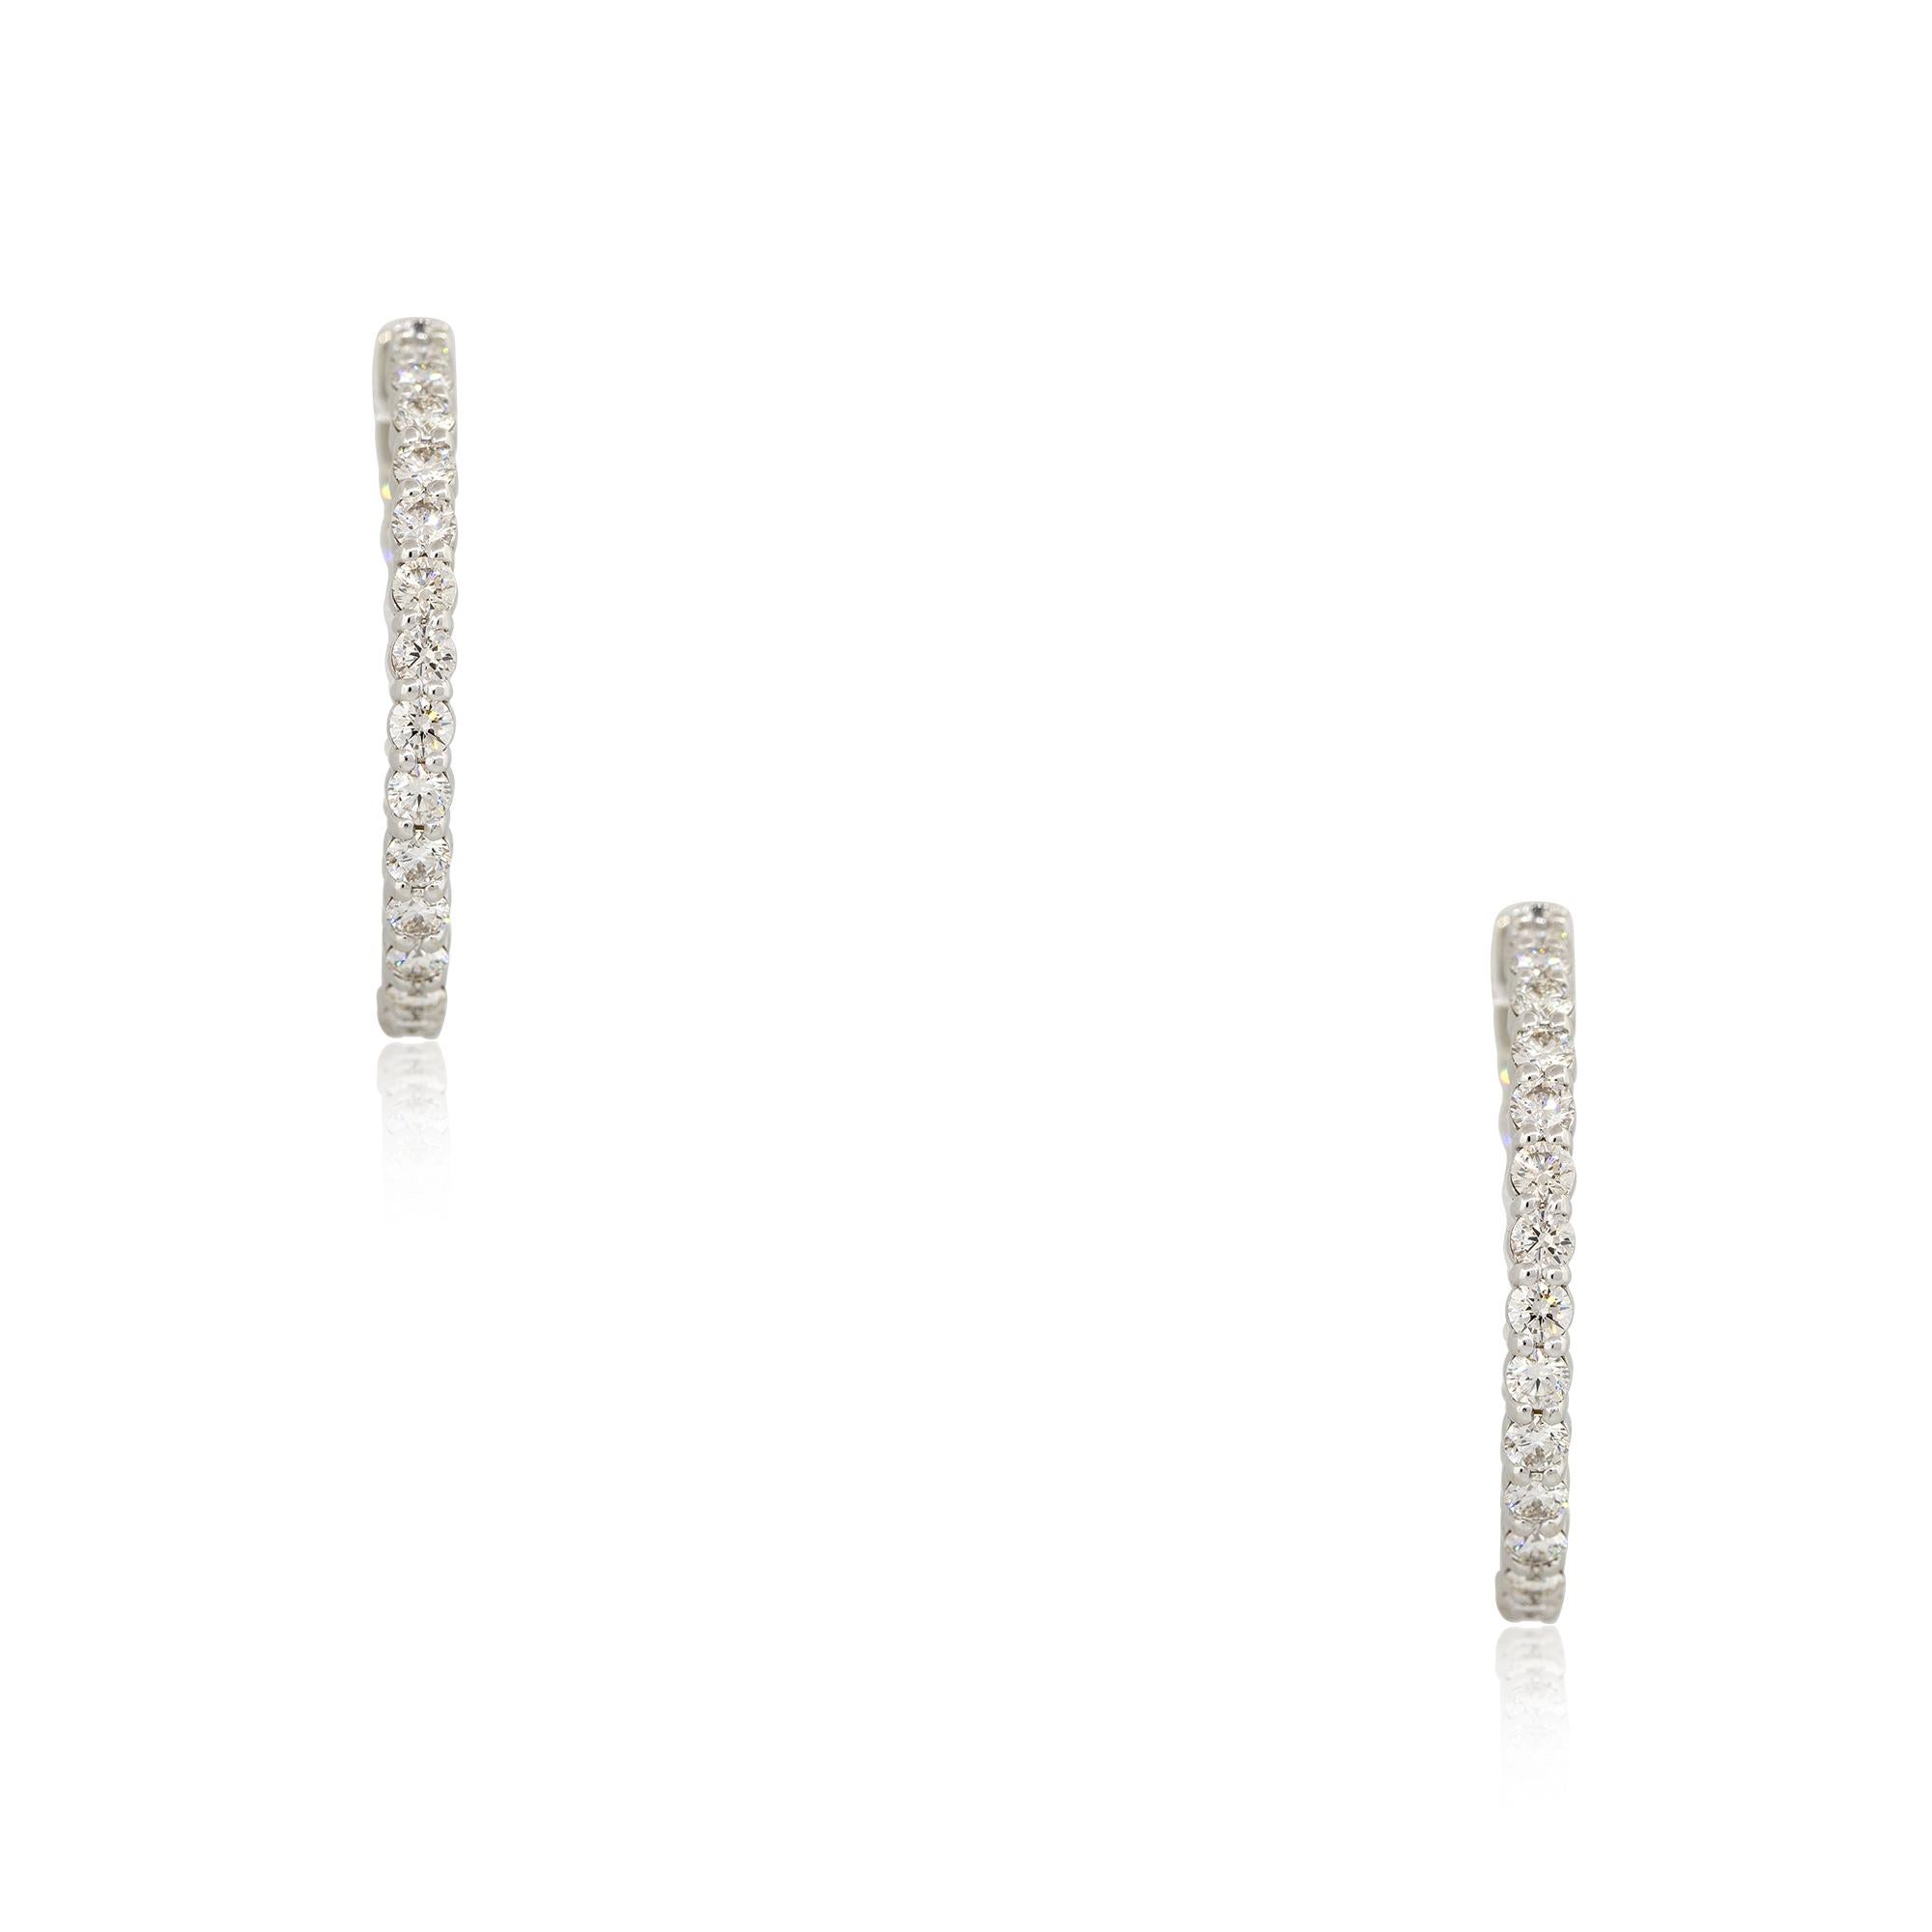 14k White Gold 4.5ct Round Brilliant Cut Diamond Inside Out Hoop Earrings

Product: Inside-Out Diamond Hoop Earrings
Material: 14k White Gold
Diamond Details: There are approximately 4.5 carats of round brilliant cut diamonds (50 stones)
Diamond